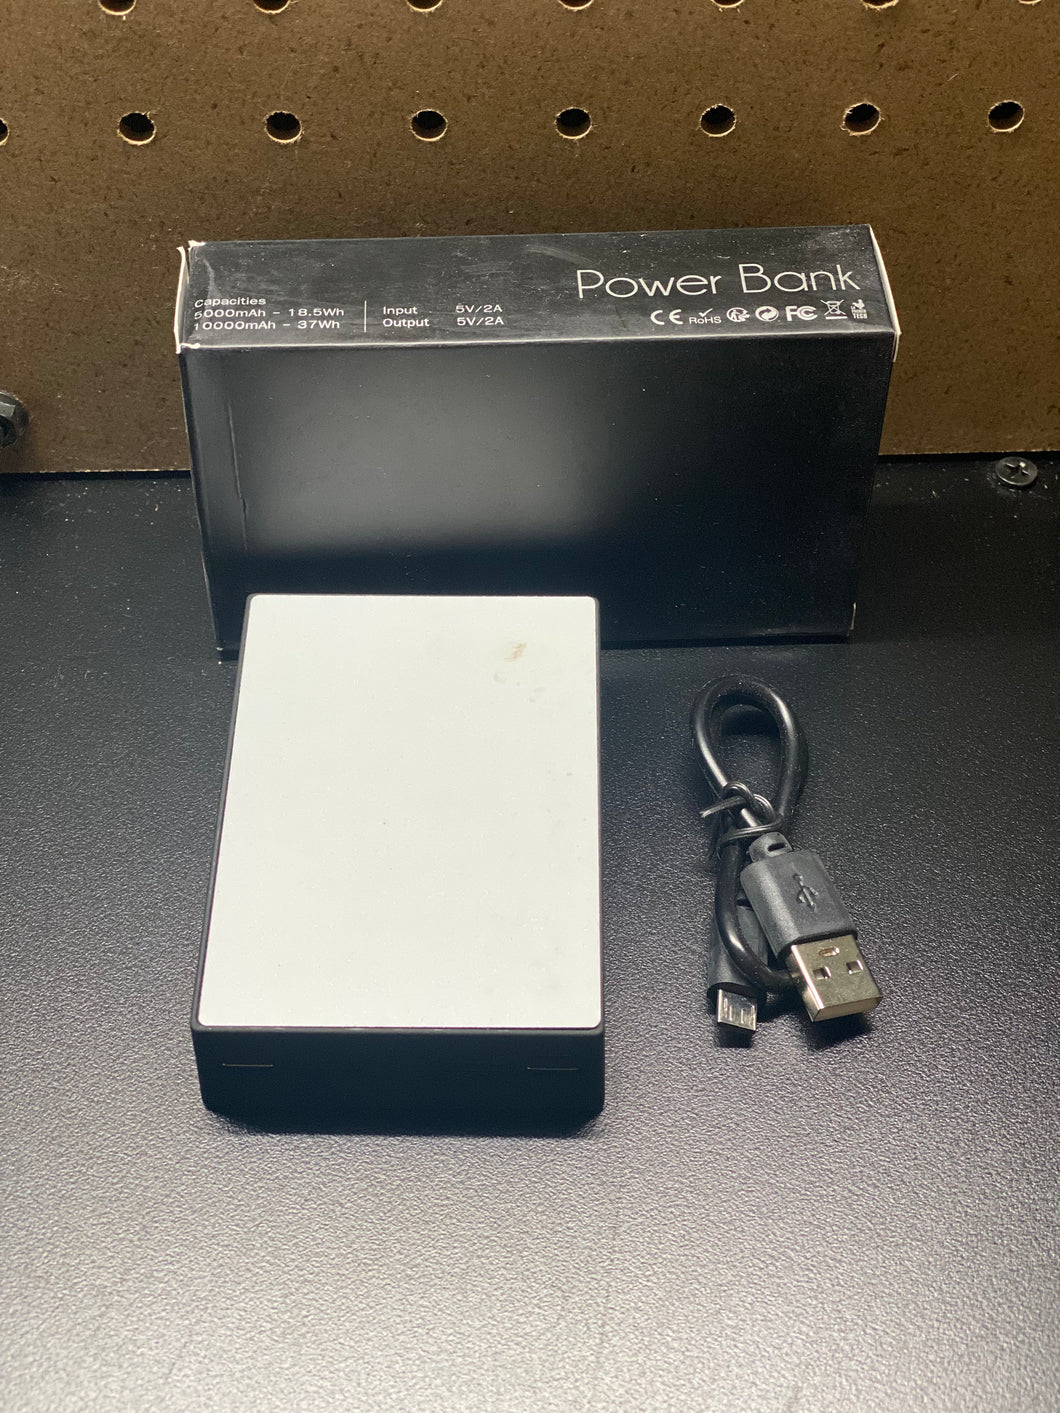 Power Bank Charger (blank)